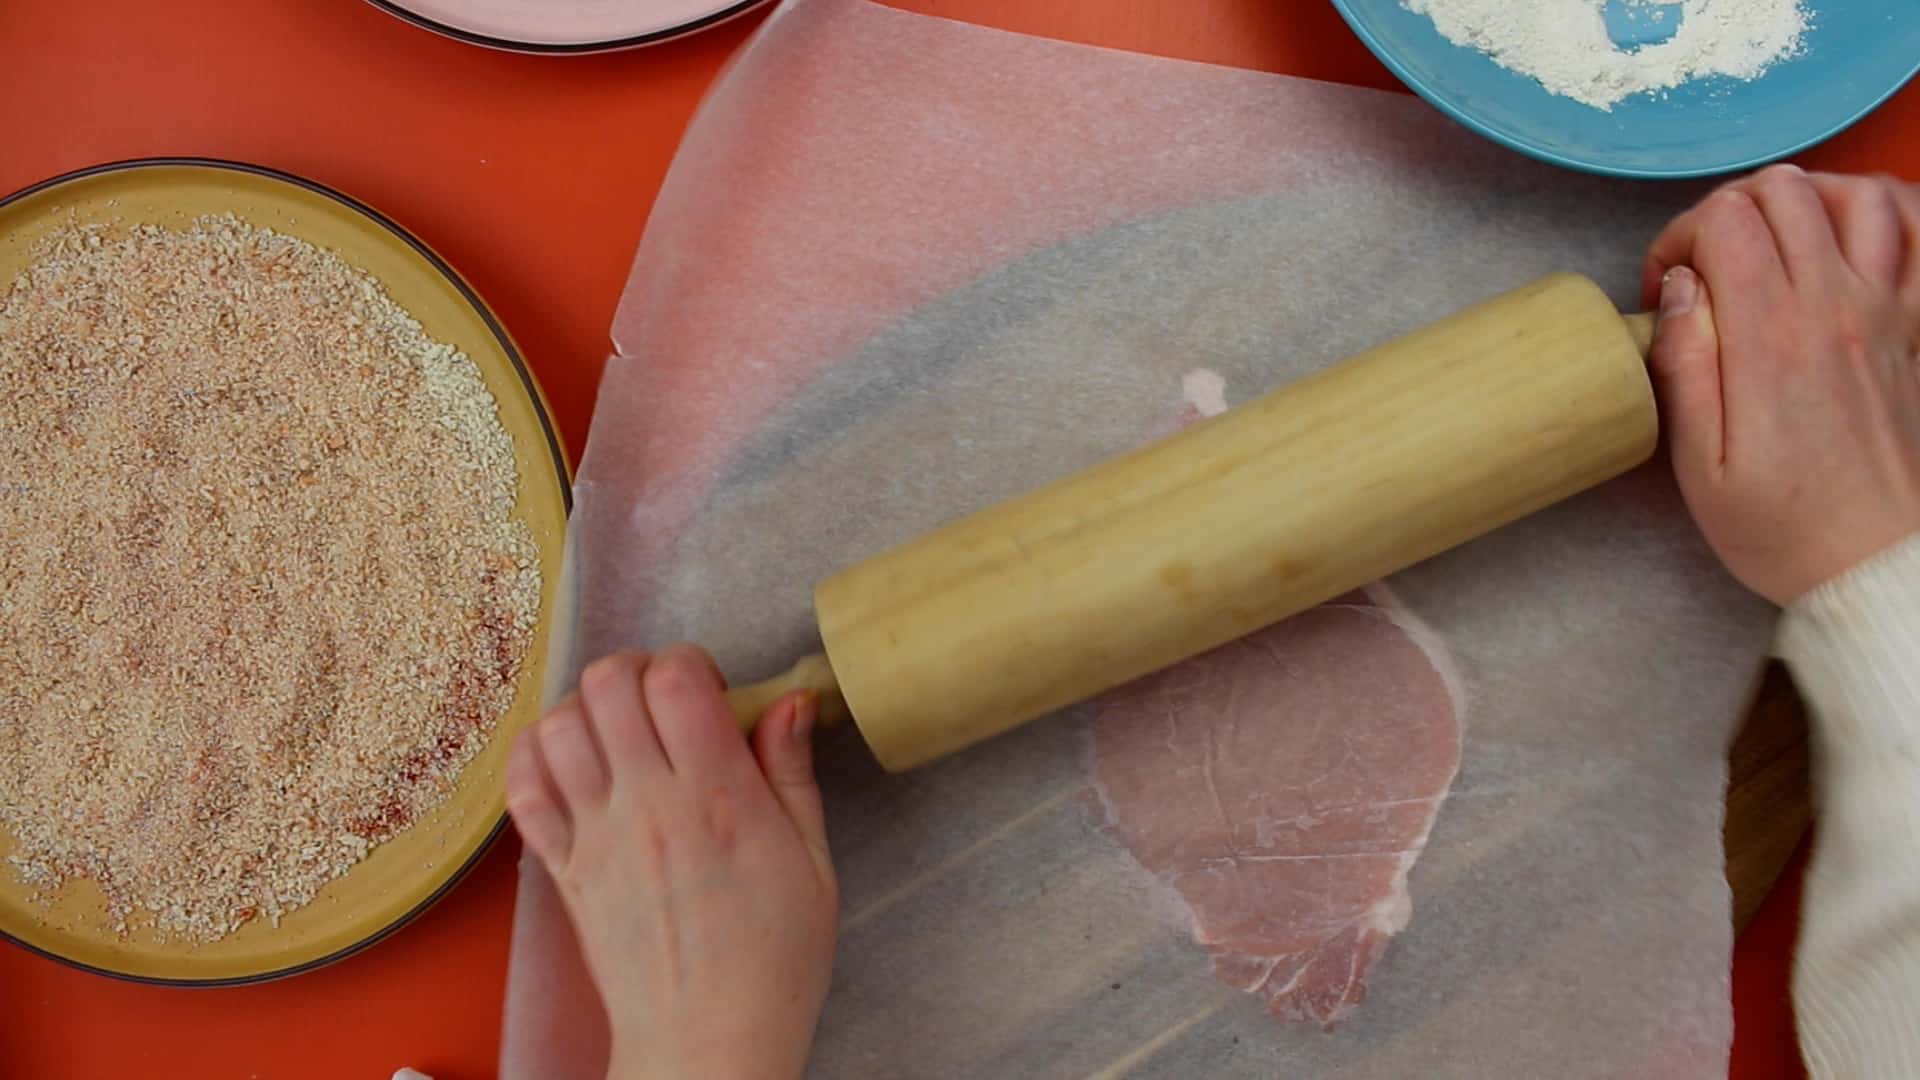 Pork with grease proof paper over the top being pounded with rolling pin with breadcrumbs and flour on separate plates.